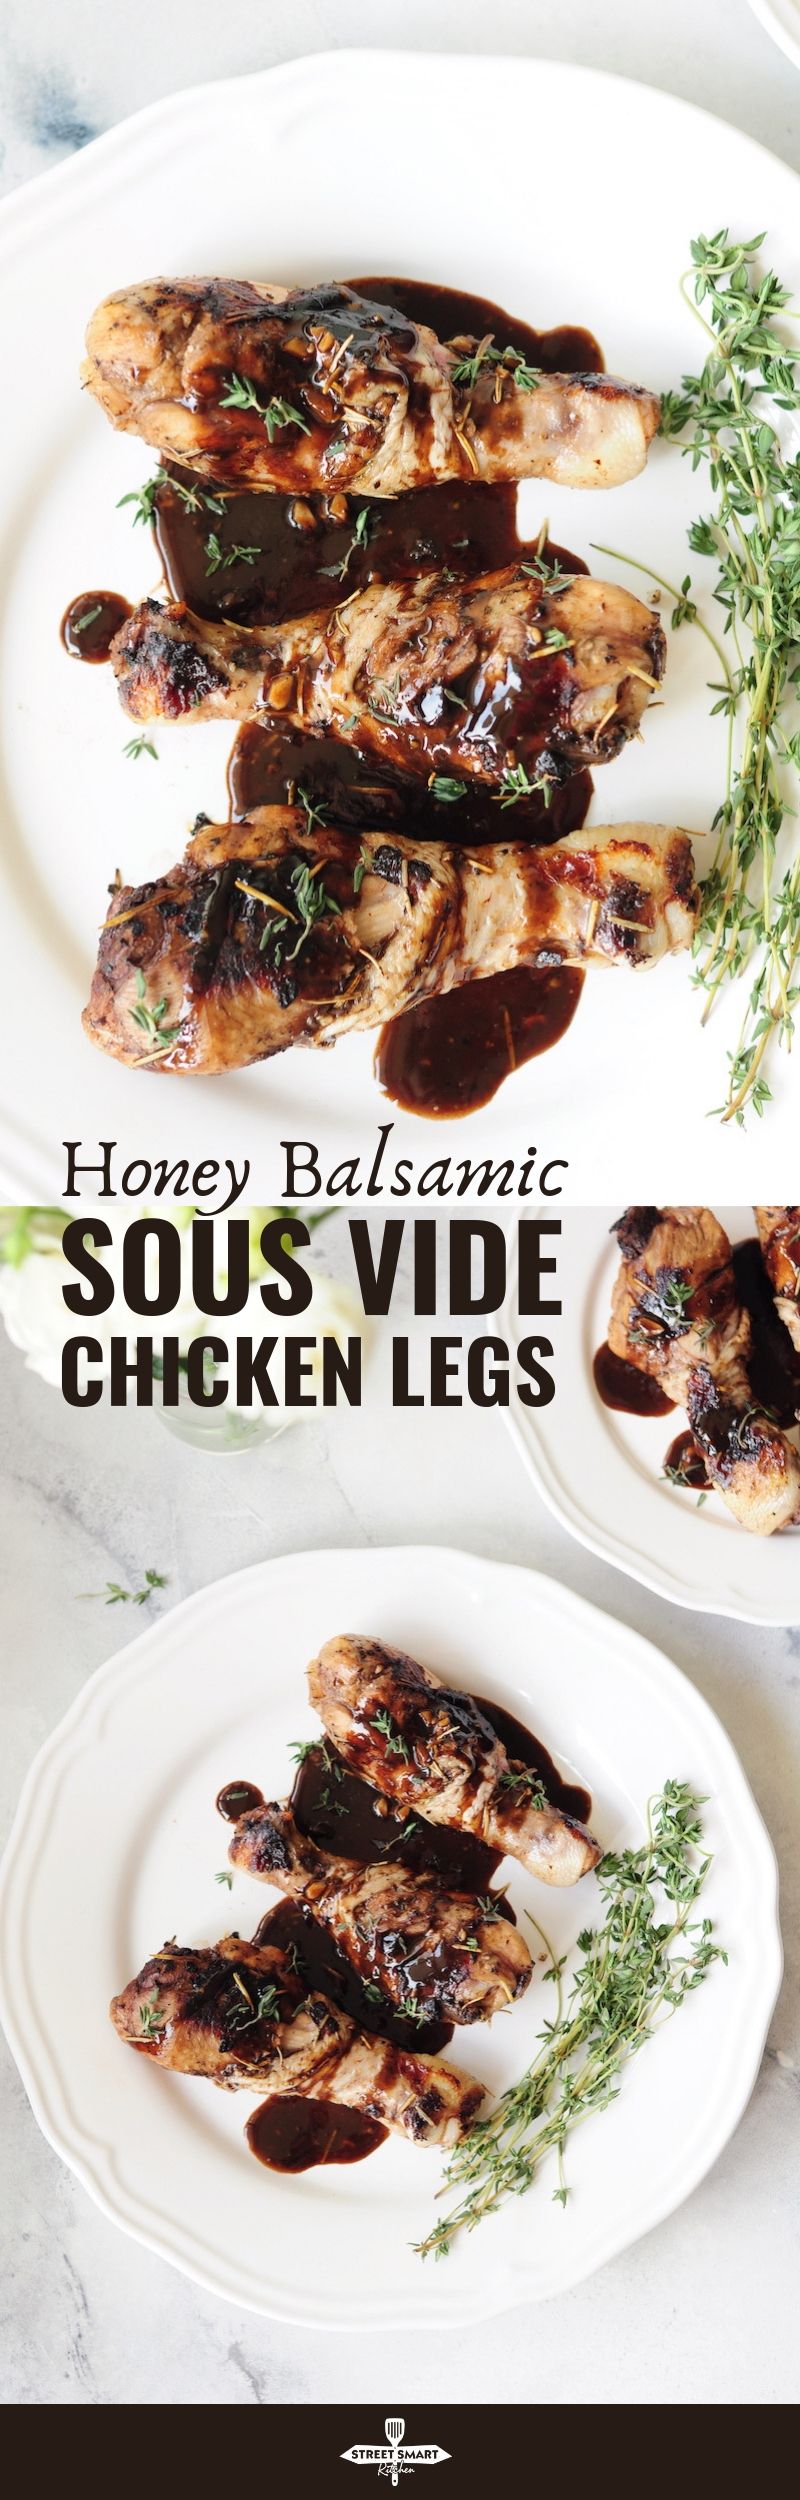 These sous vide chicken legs offer super tender chicken meat along with crispy skin. Drizzled with a delectable honey balsamic sauce, they are fingerlickingly delicious.